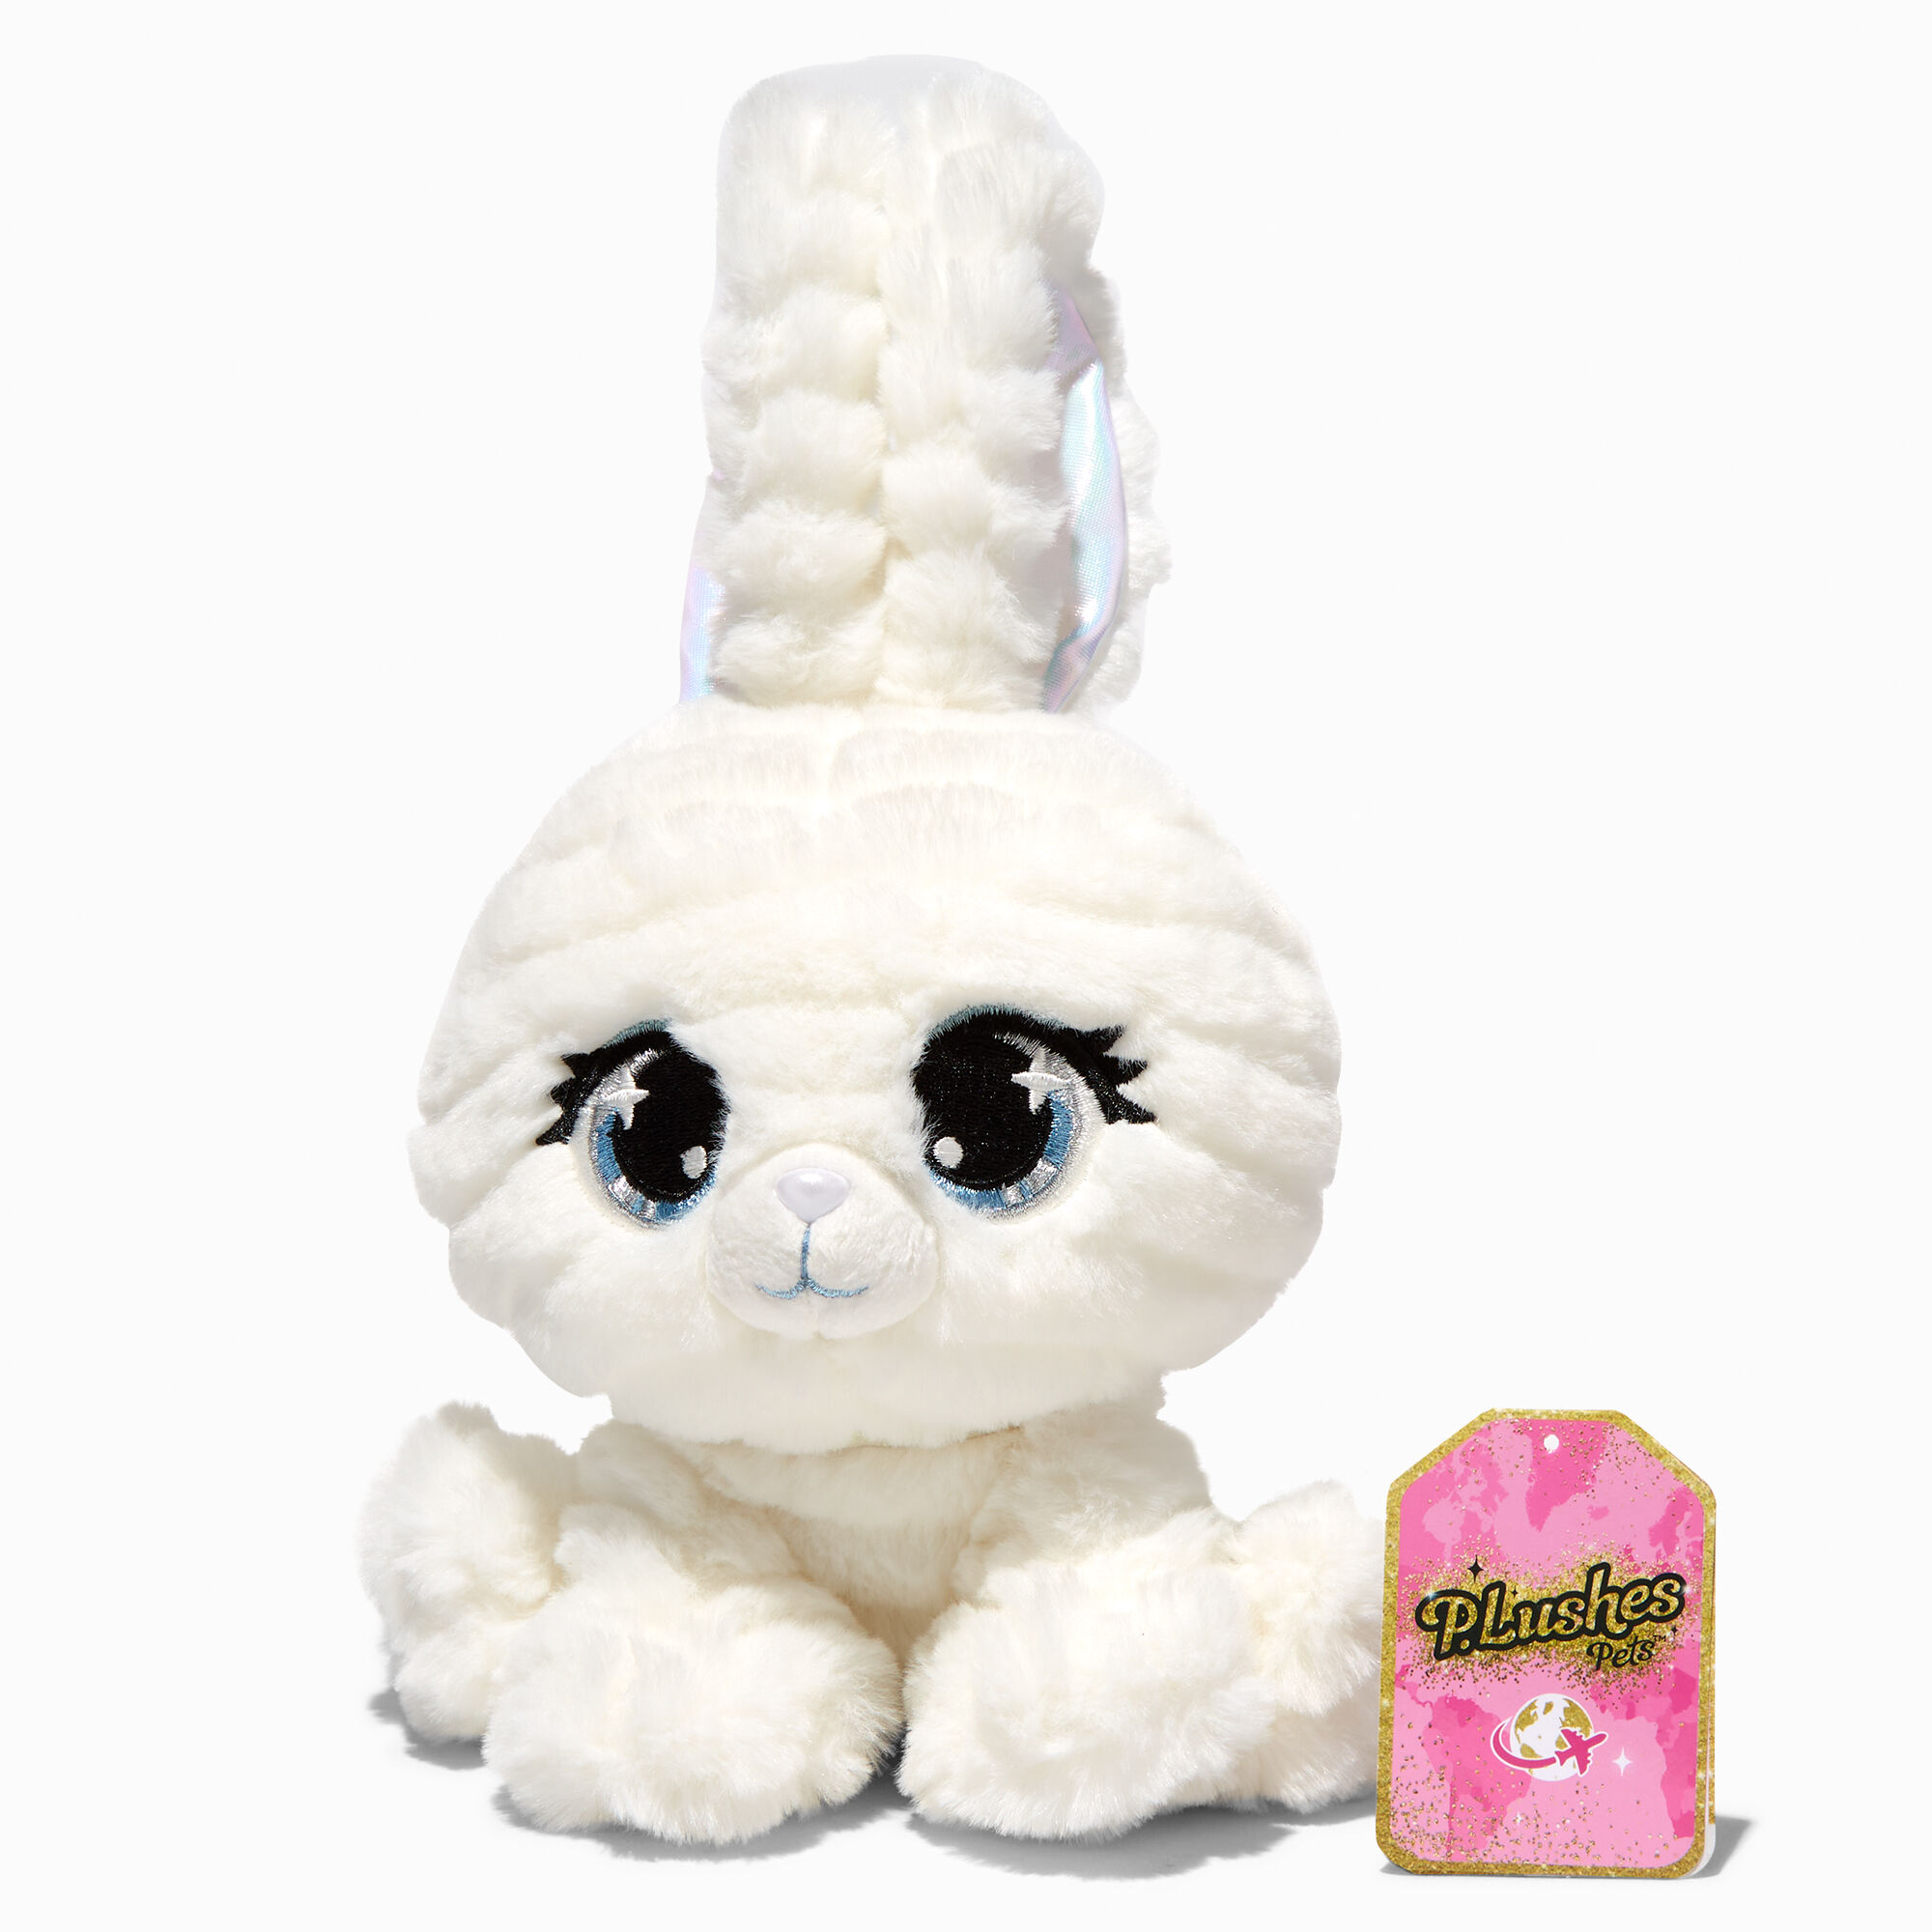 View Claires Plushes Pets Jetsetter Wave 1 Heidi Fluffson Soft Toy information